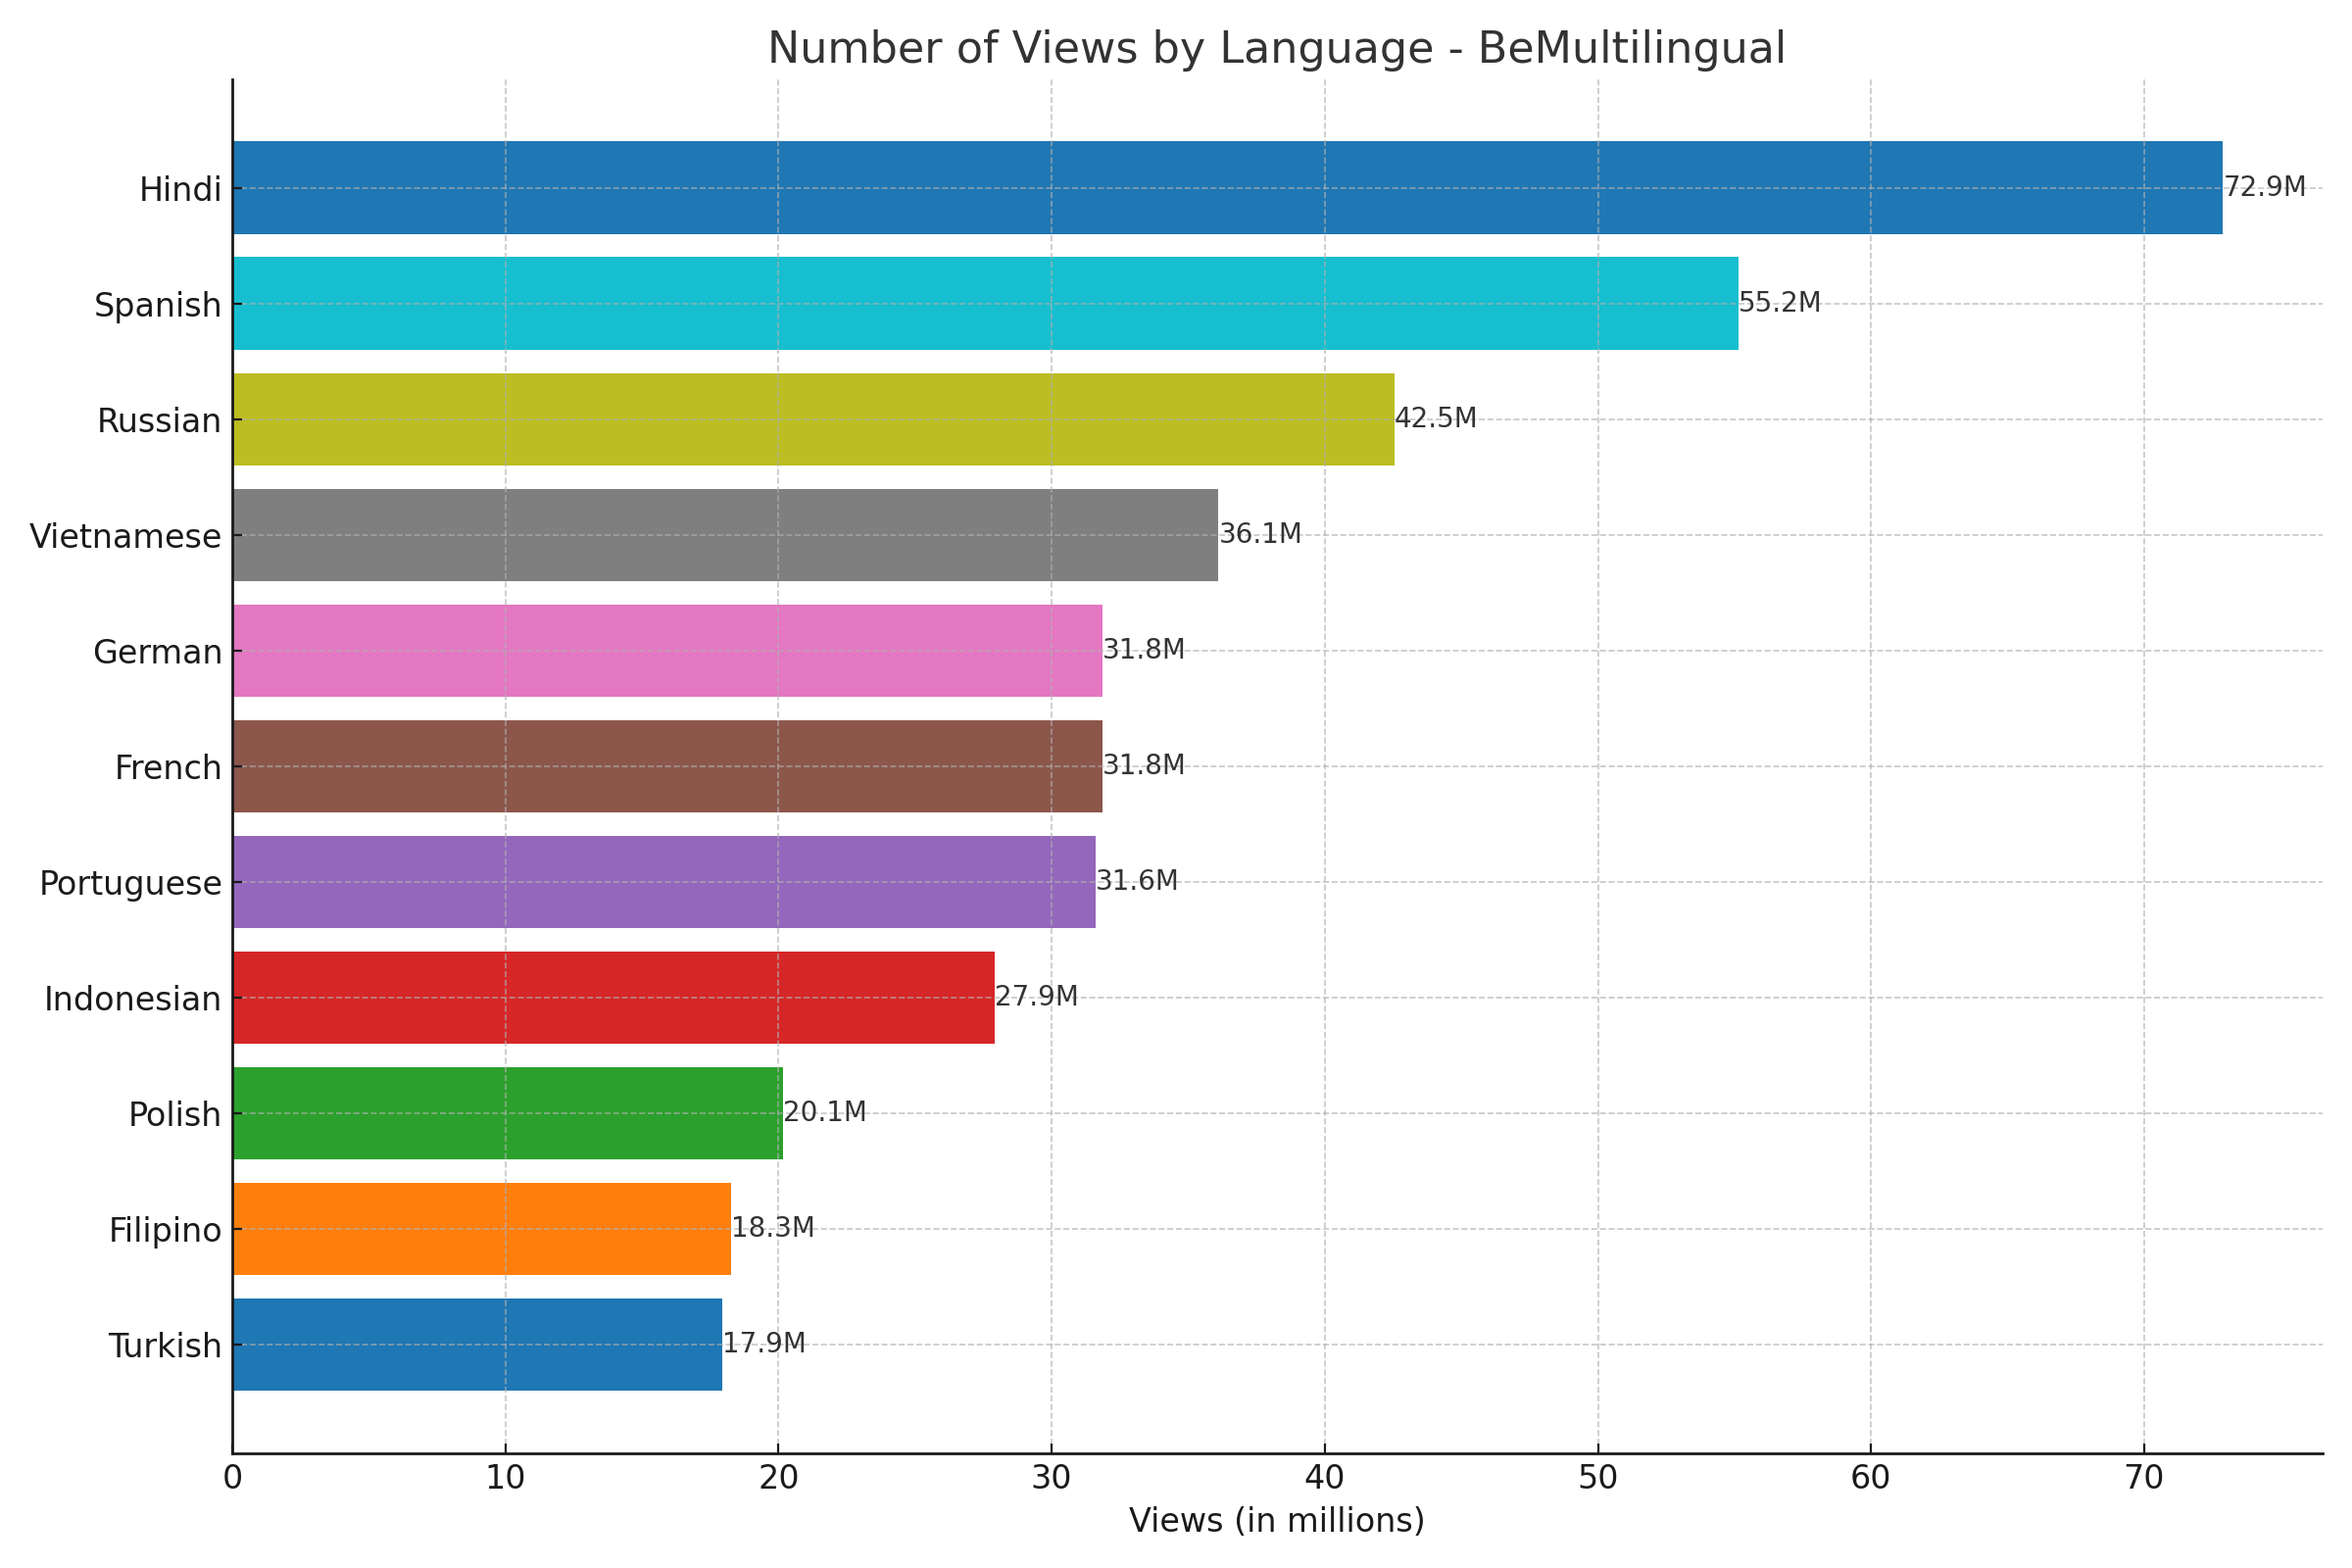 Most Popular Languages on YouTube